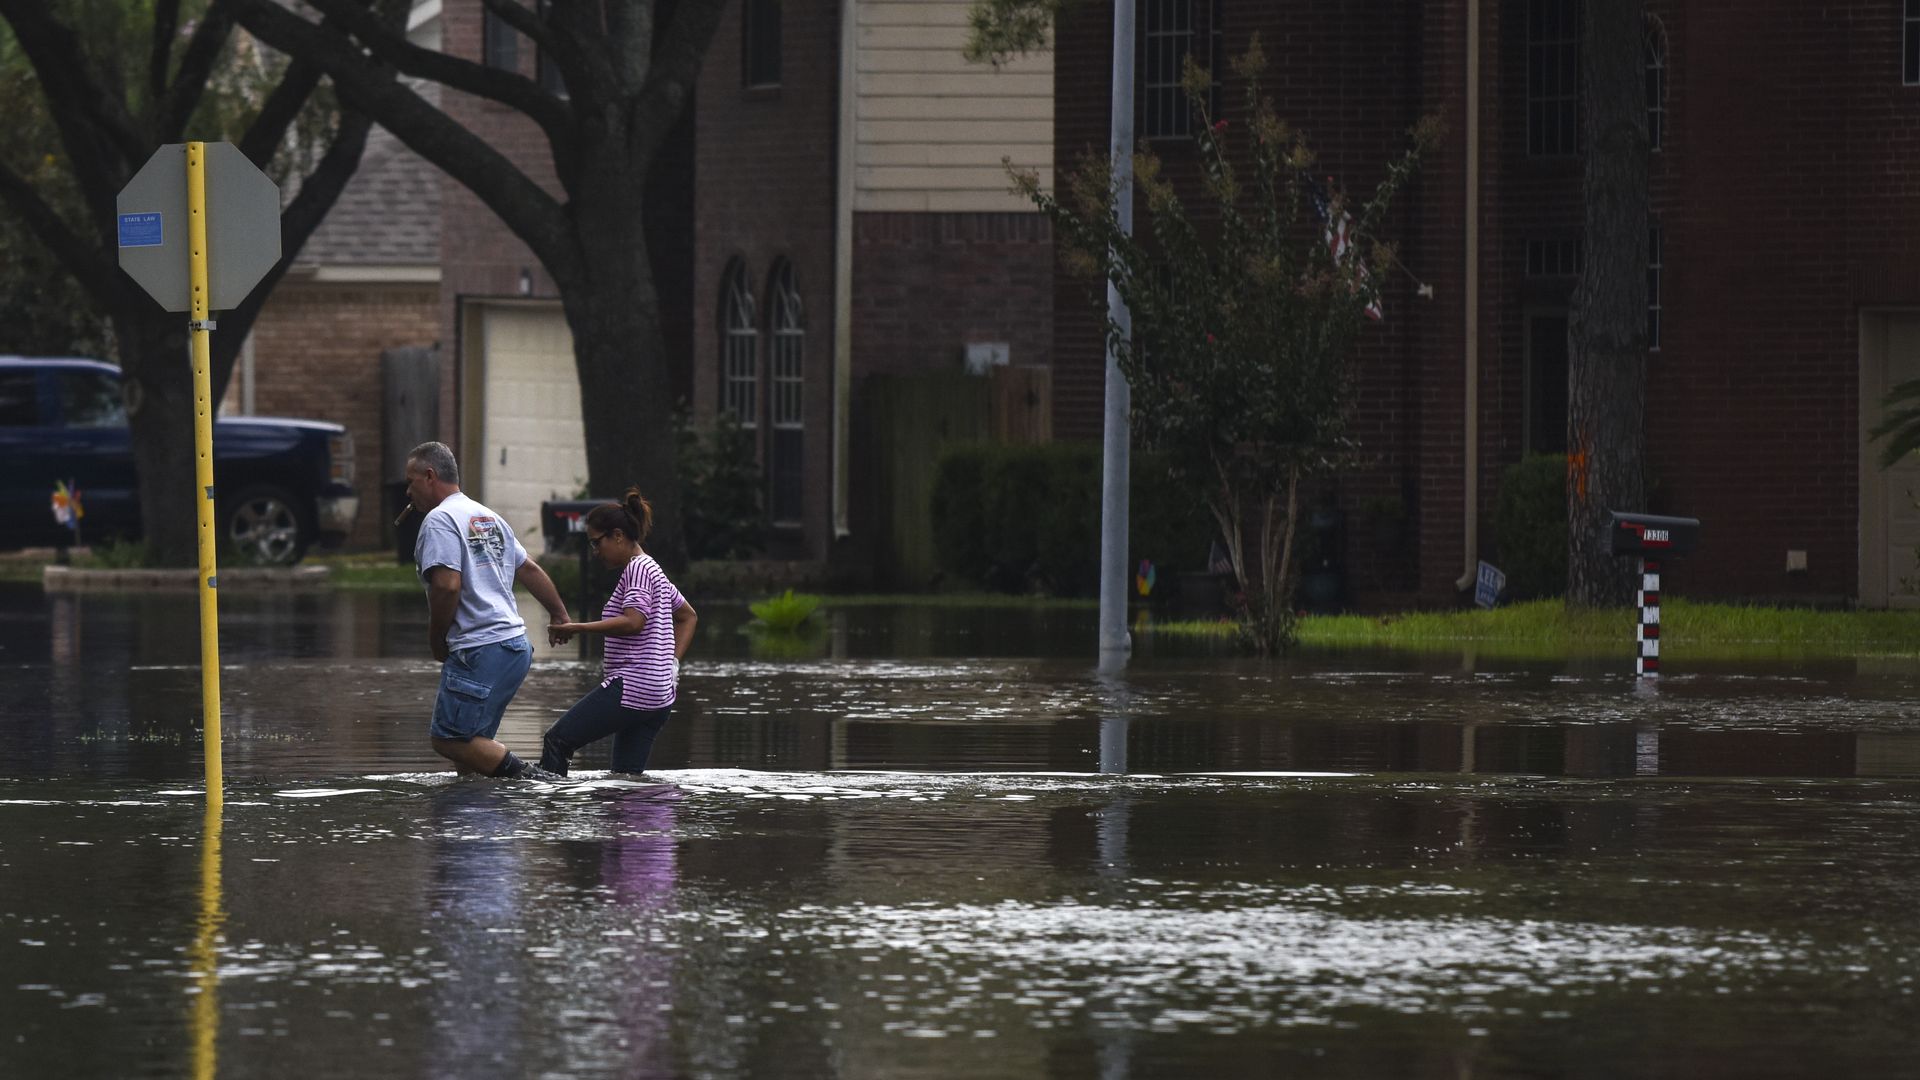 A couple walks through an inundated community in Houston after it was hit by Hurricane Harvey.